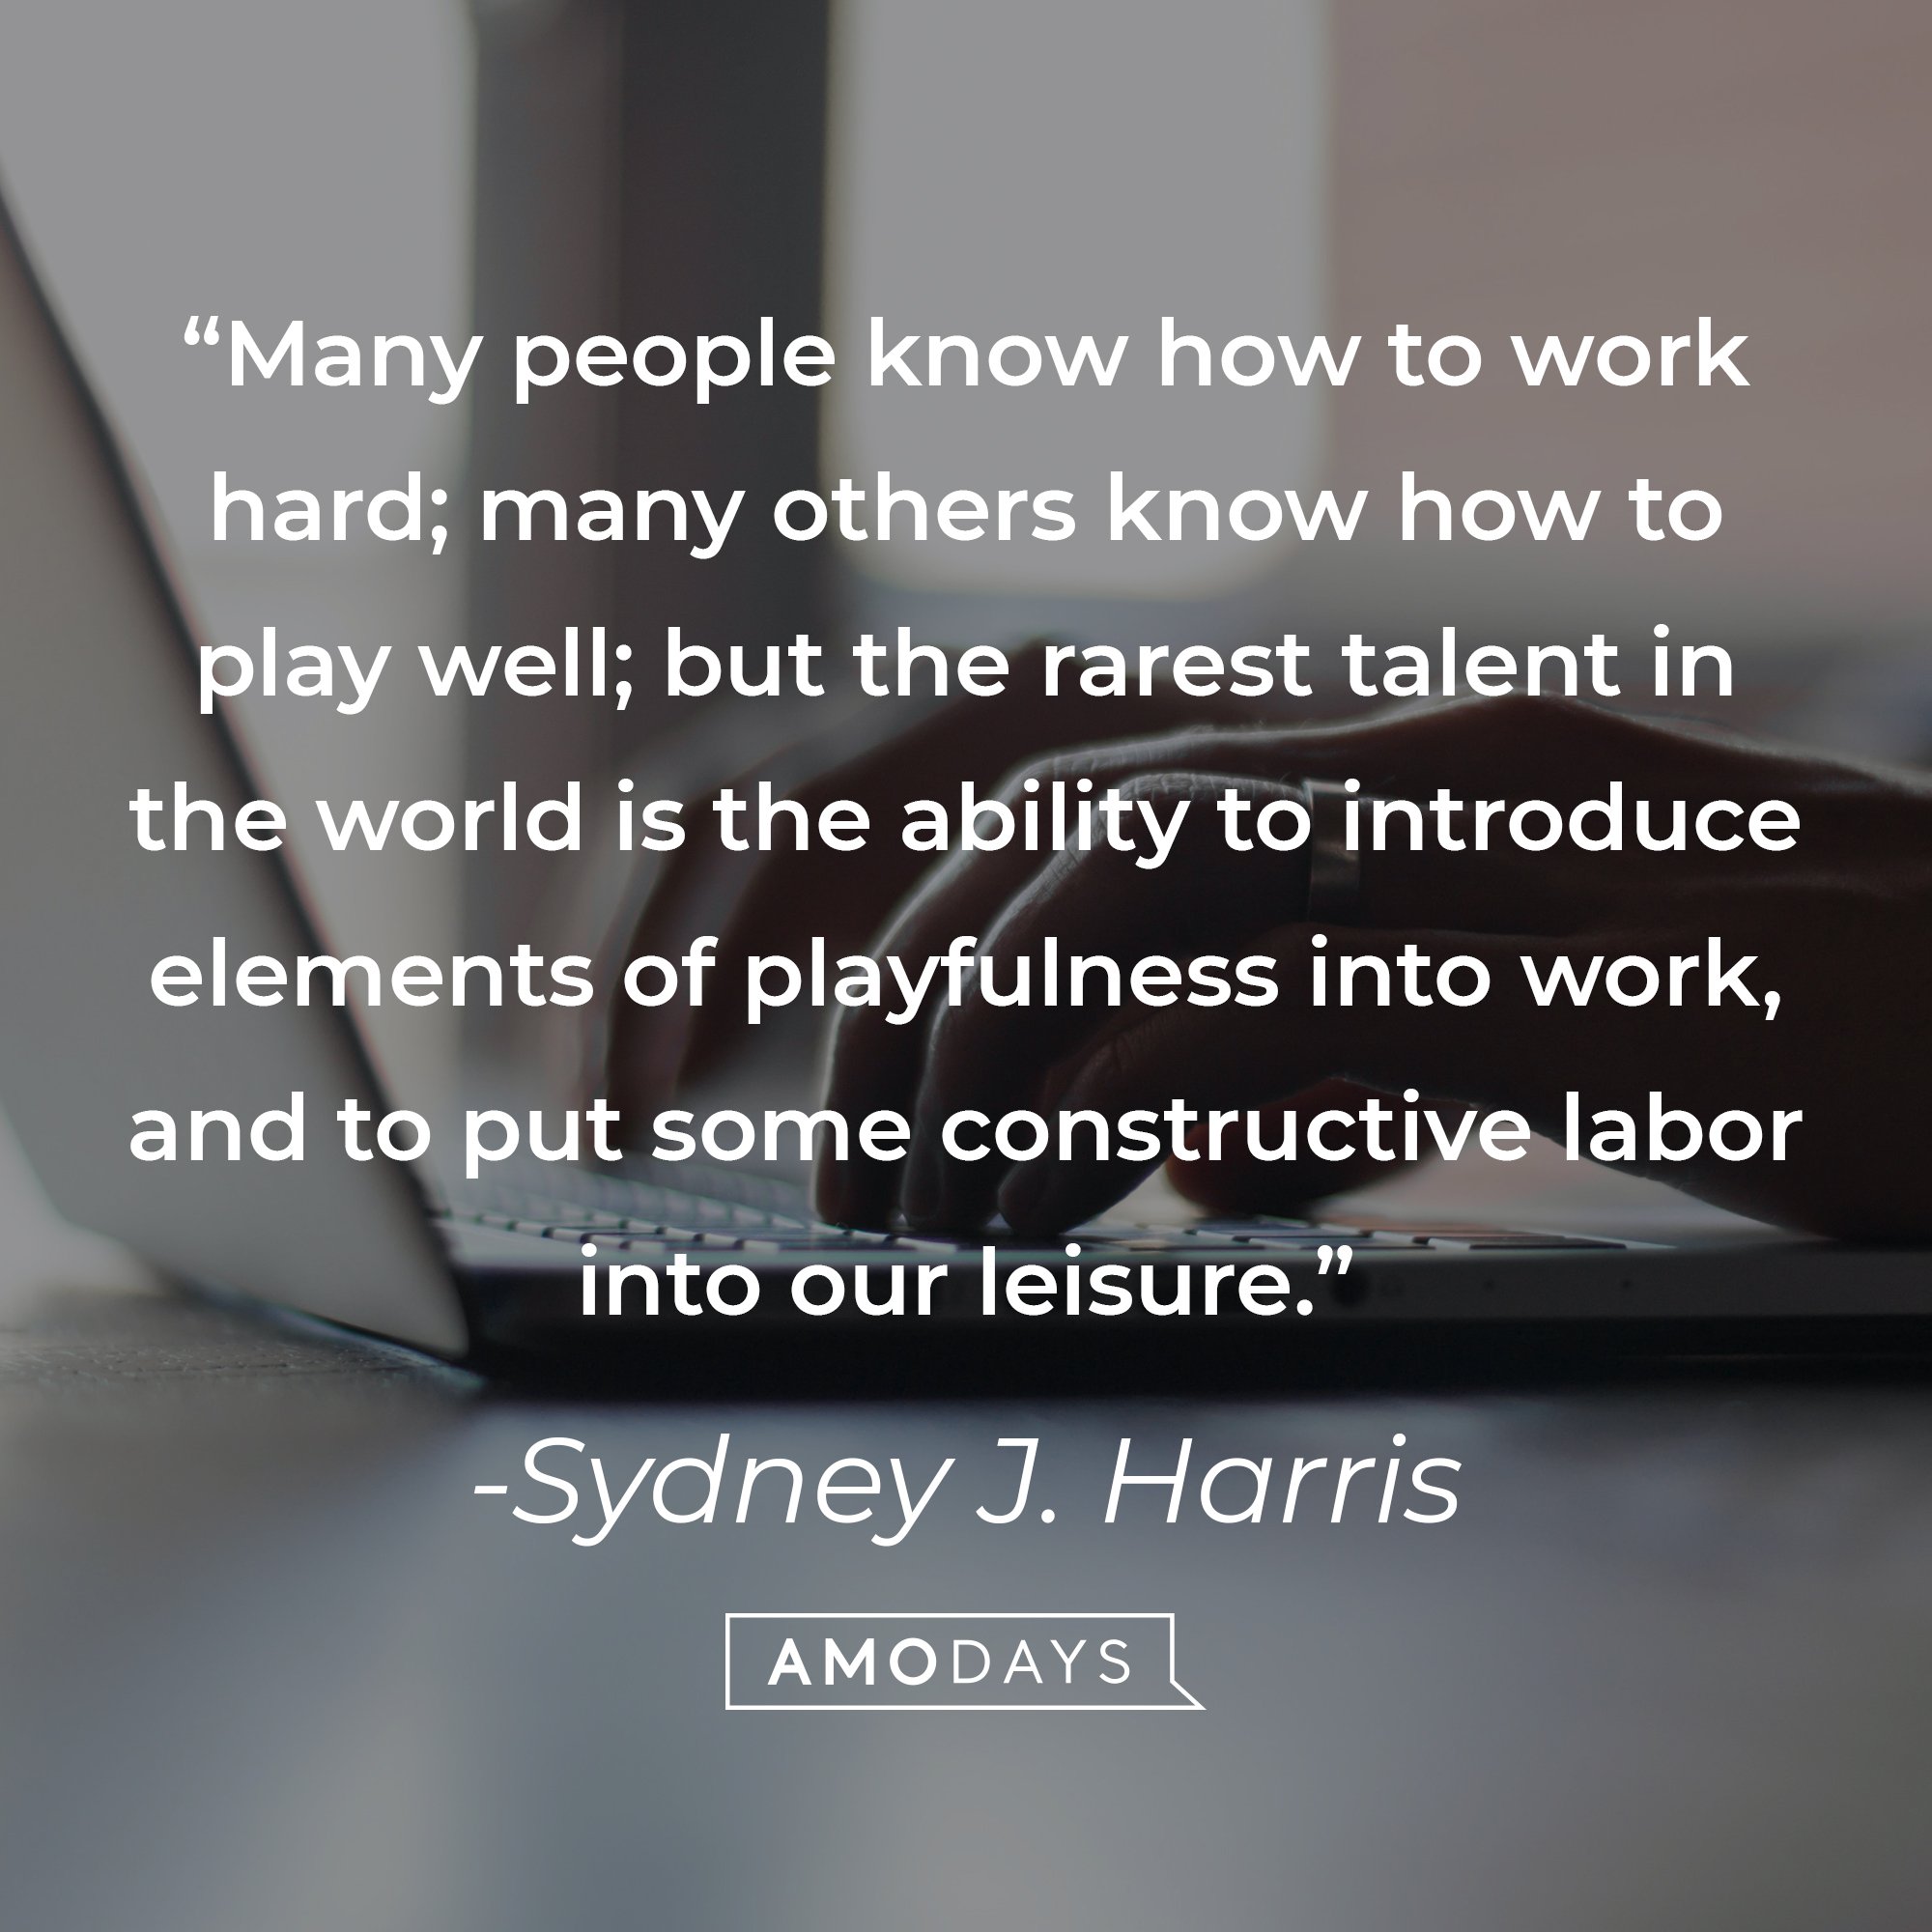 Sydney J. Harris' quote: "Many people know how to work hard; many others know how to play well; but the rarest talent in the world is the ability to introduce elements of playfulness into work, and to put some constructive labor into our leisure." | Image: AmoDays